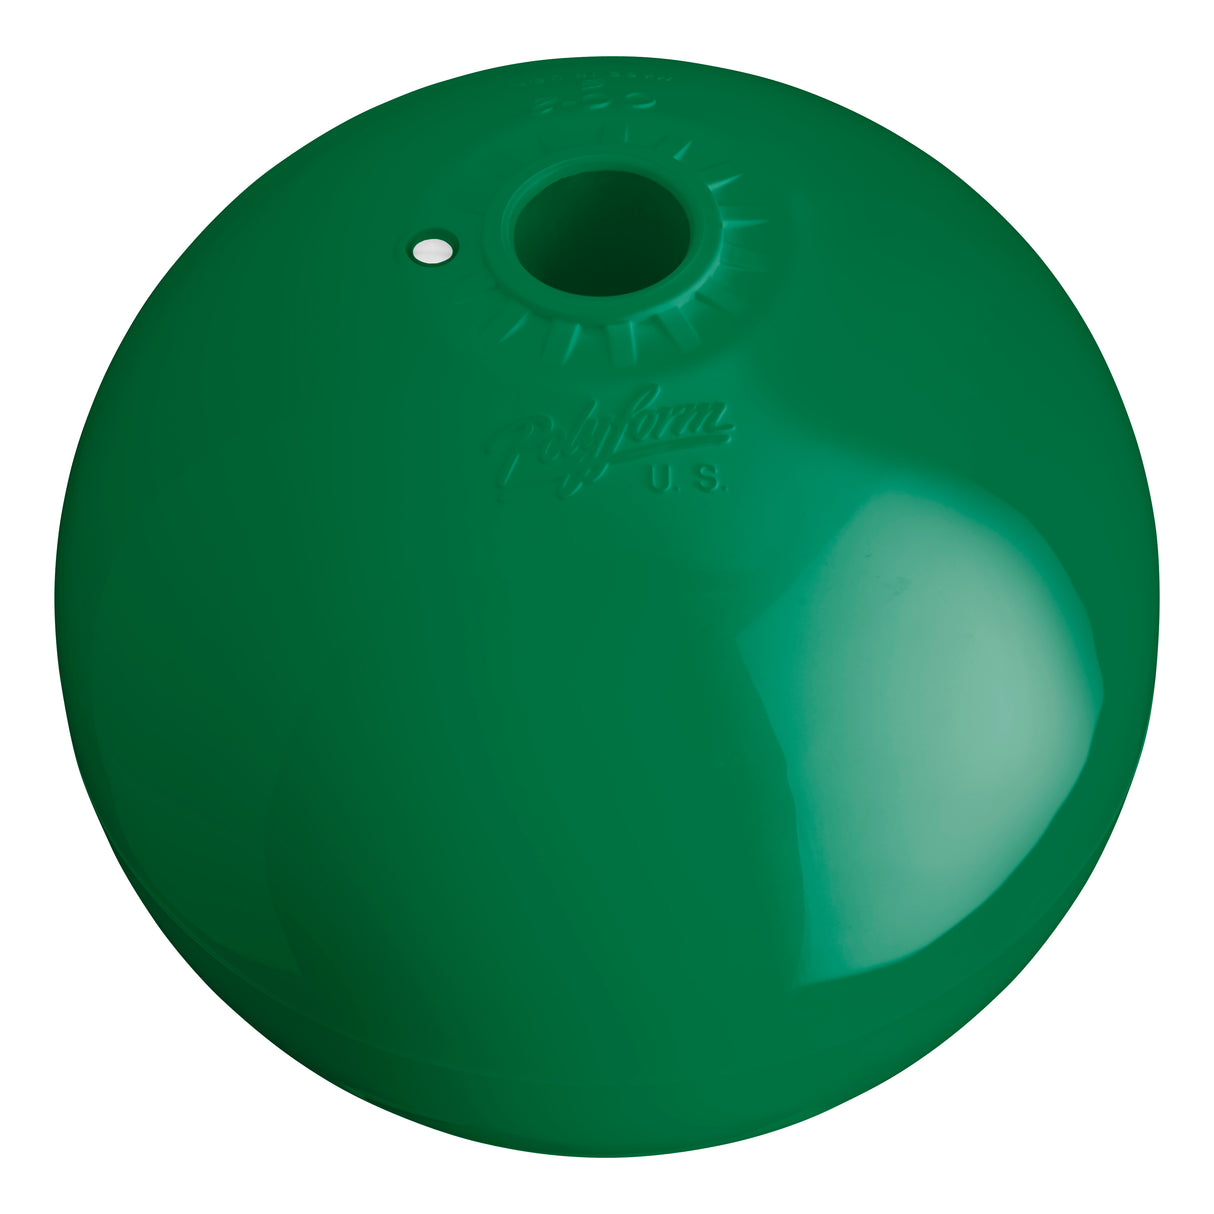 Hole through center mooring and marker buoy, Polyform CC-5 Forest Green angled shot